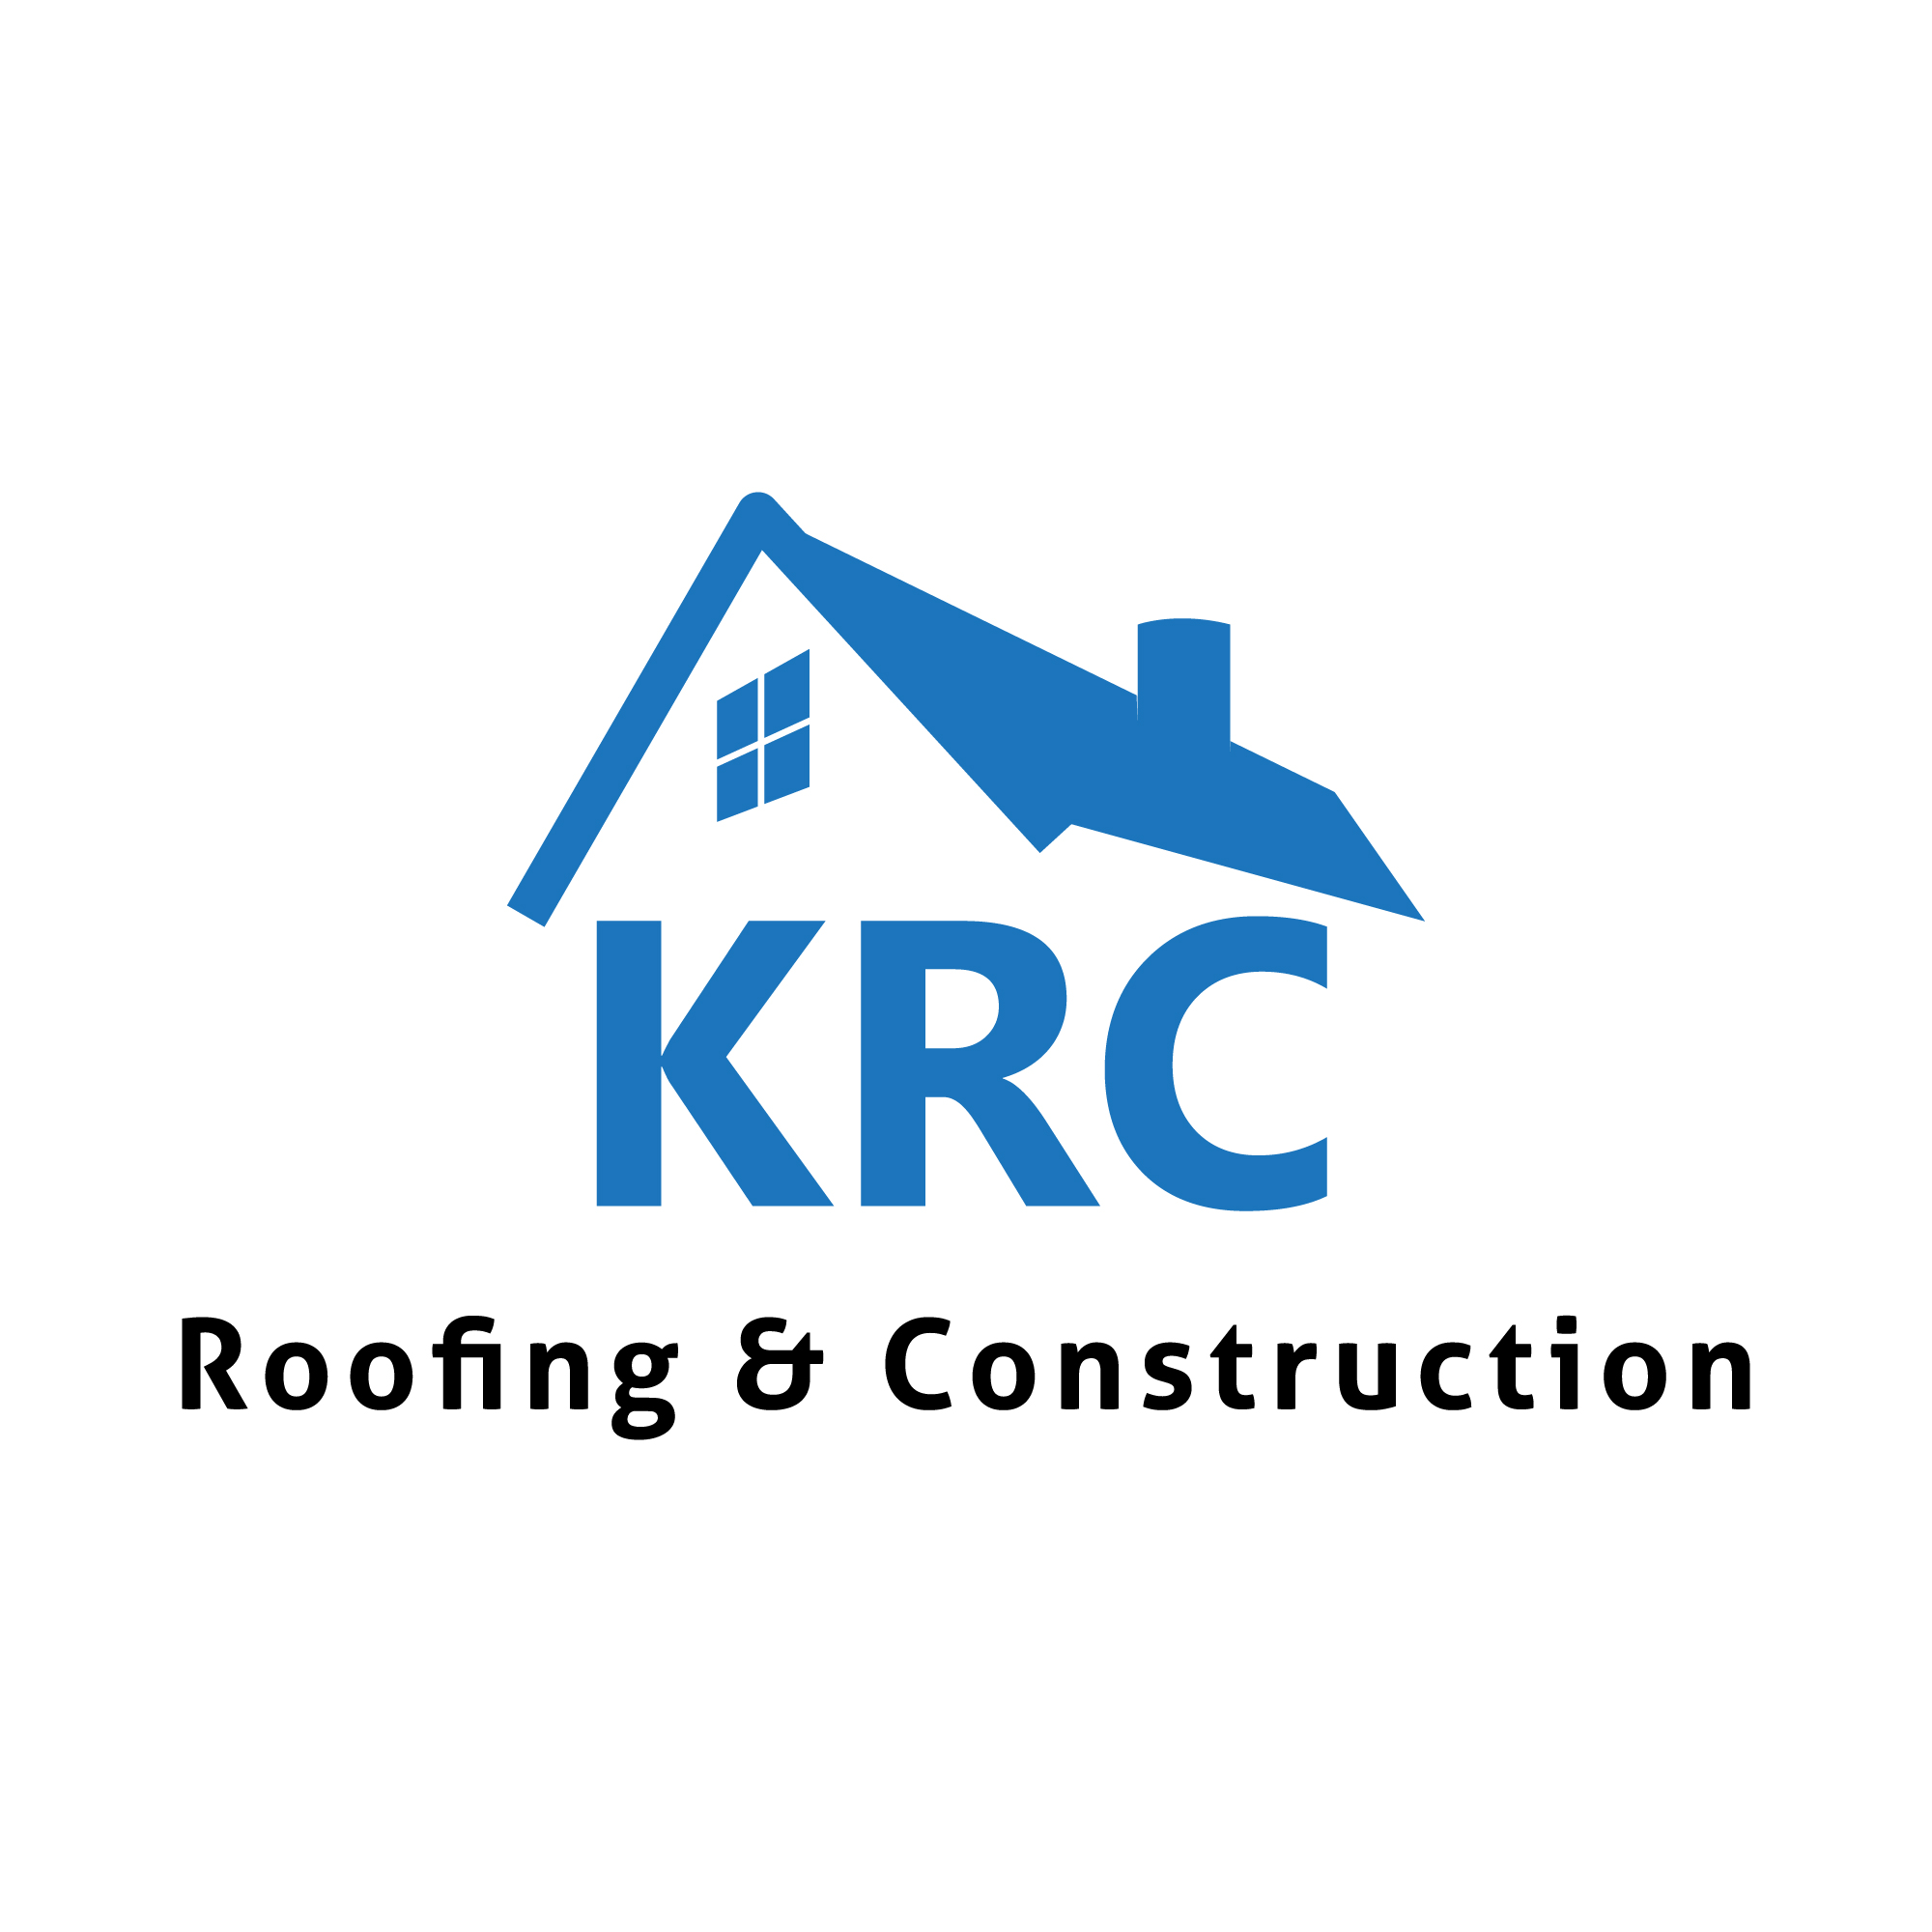 KRC Roofing Construction Louisville KY Logo Square 100 2